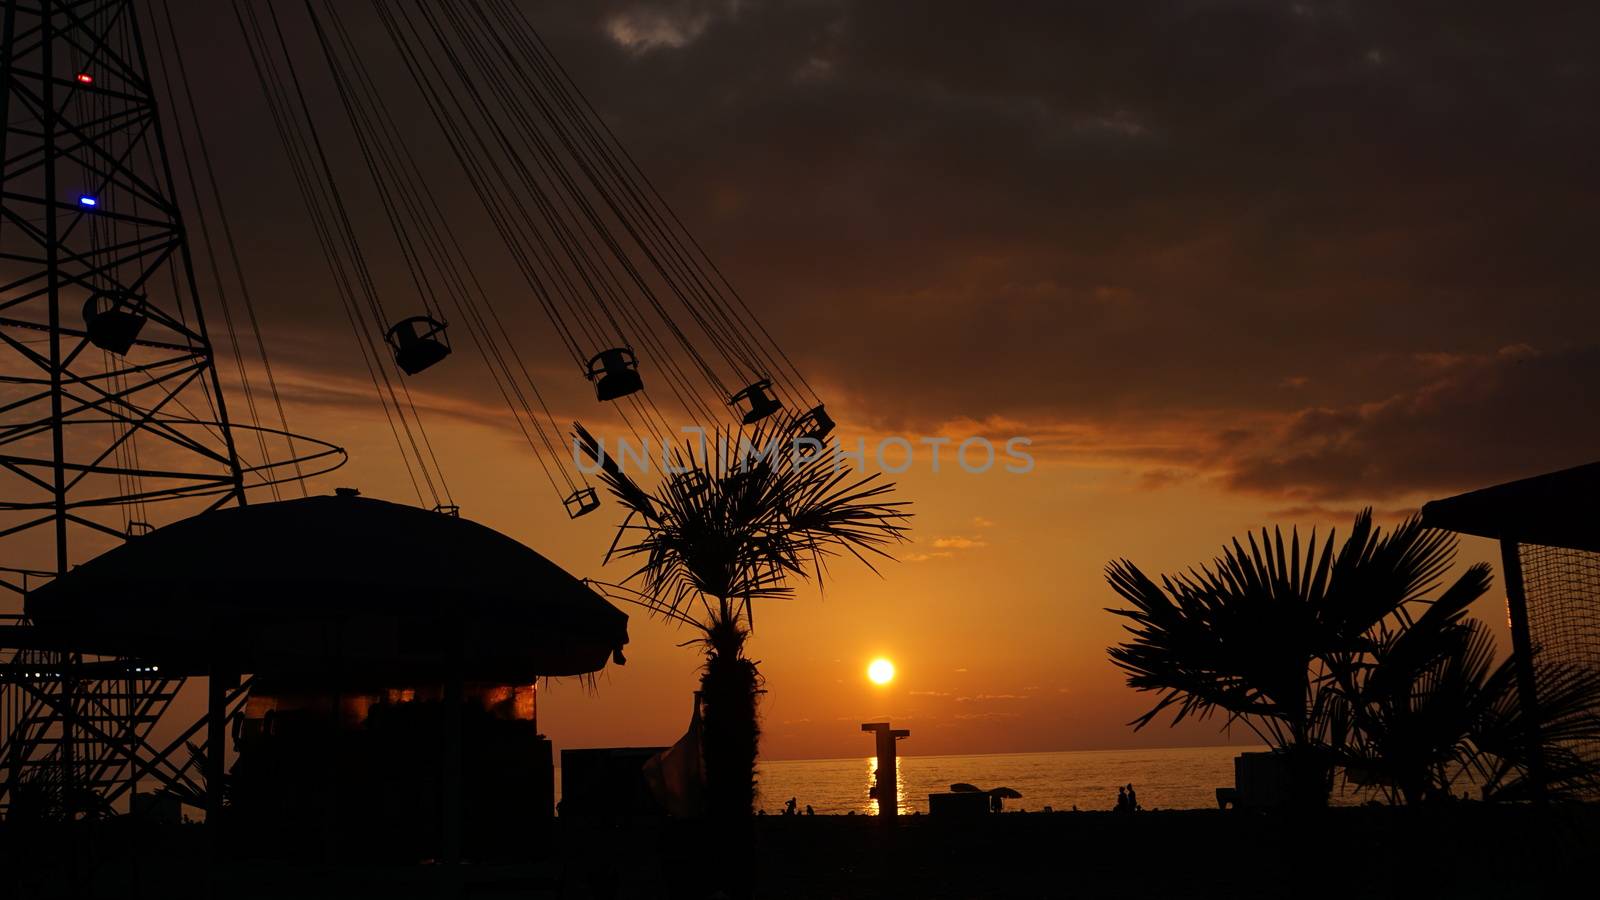 Swinging carousel roundabout chain ride at sunset. Entertainment on the beach, silhouettes of palm trees on a background of sea sunset